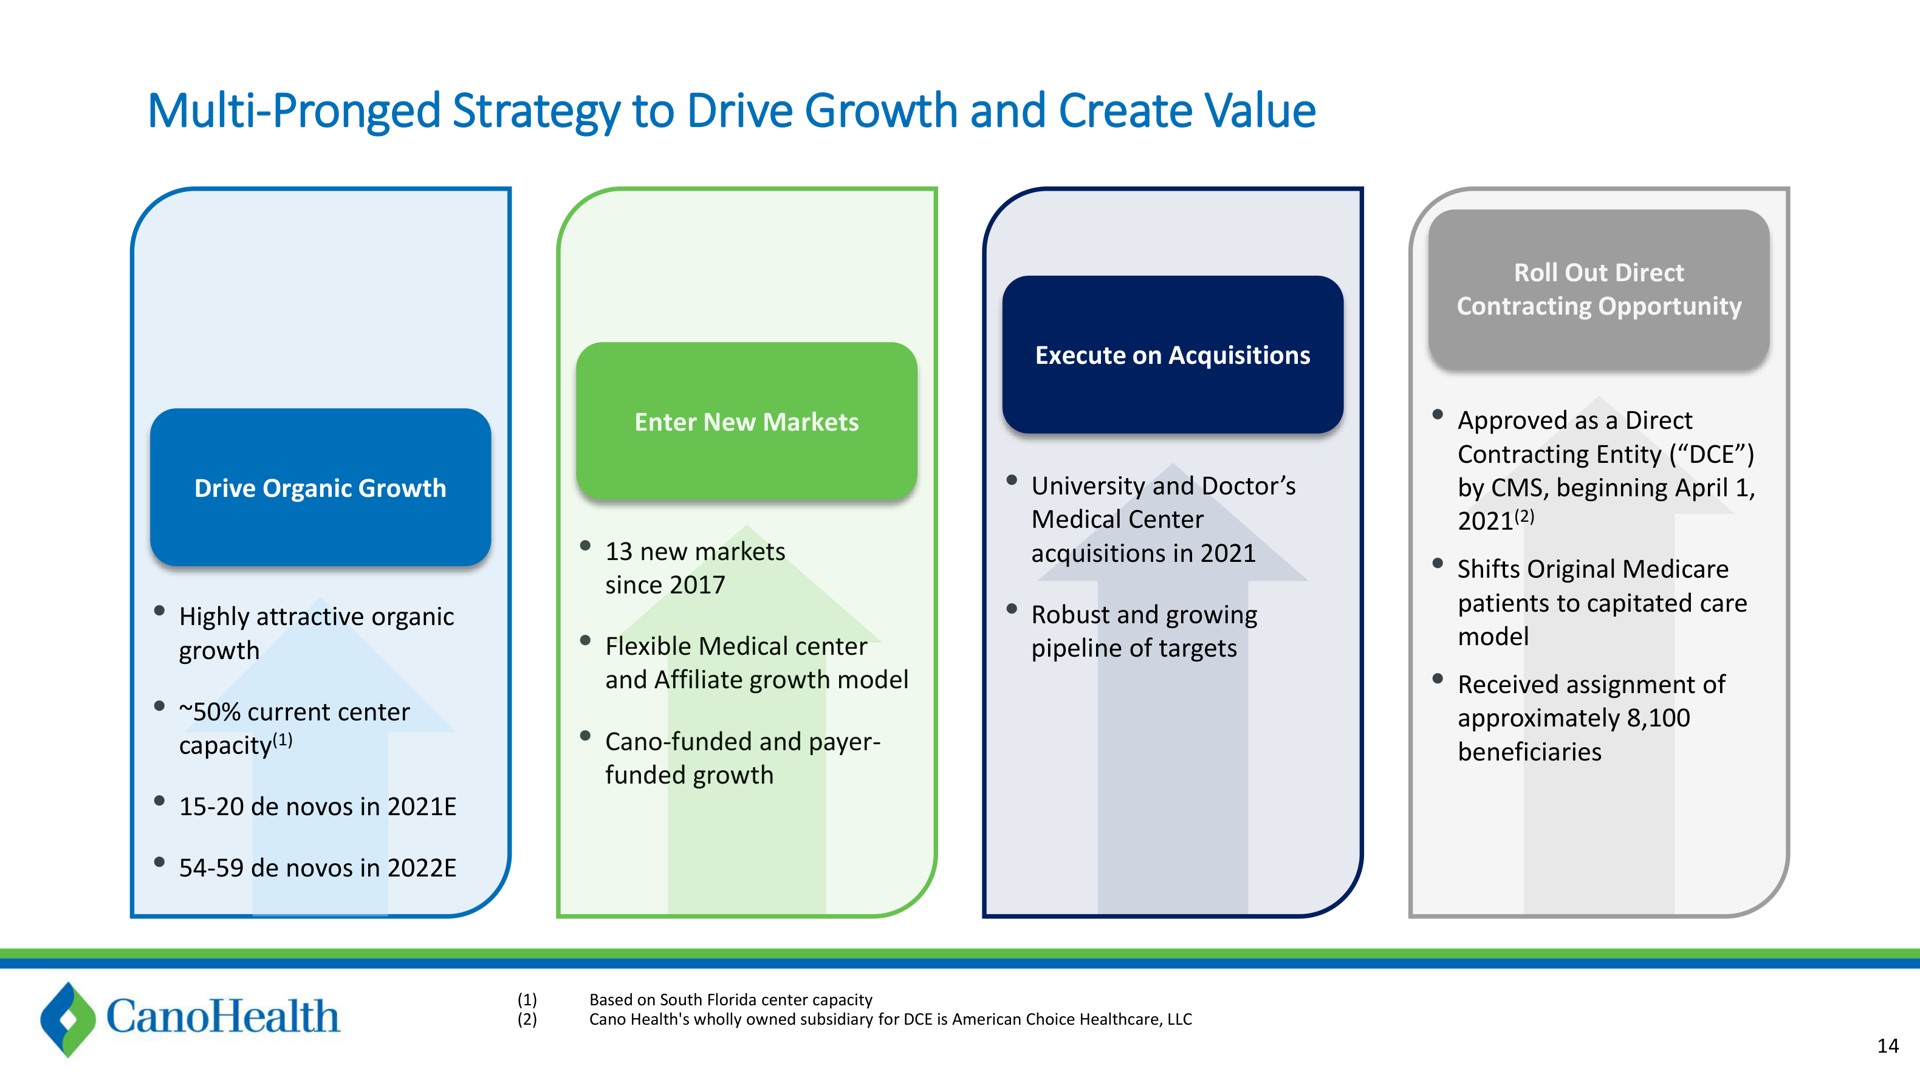 pronged strategy to drive growth and create value | Cano Health